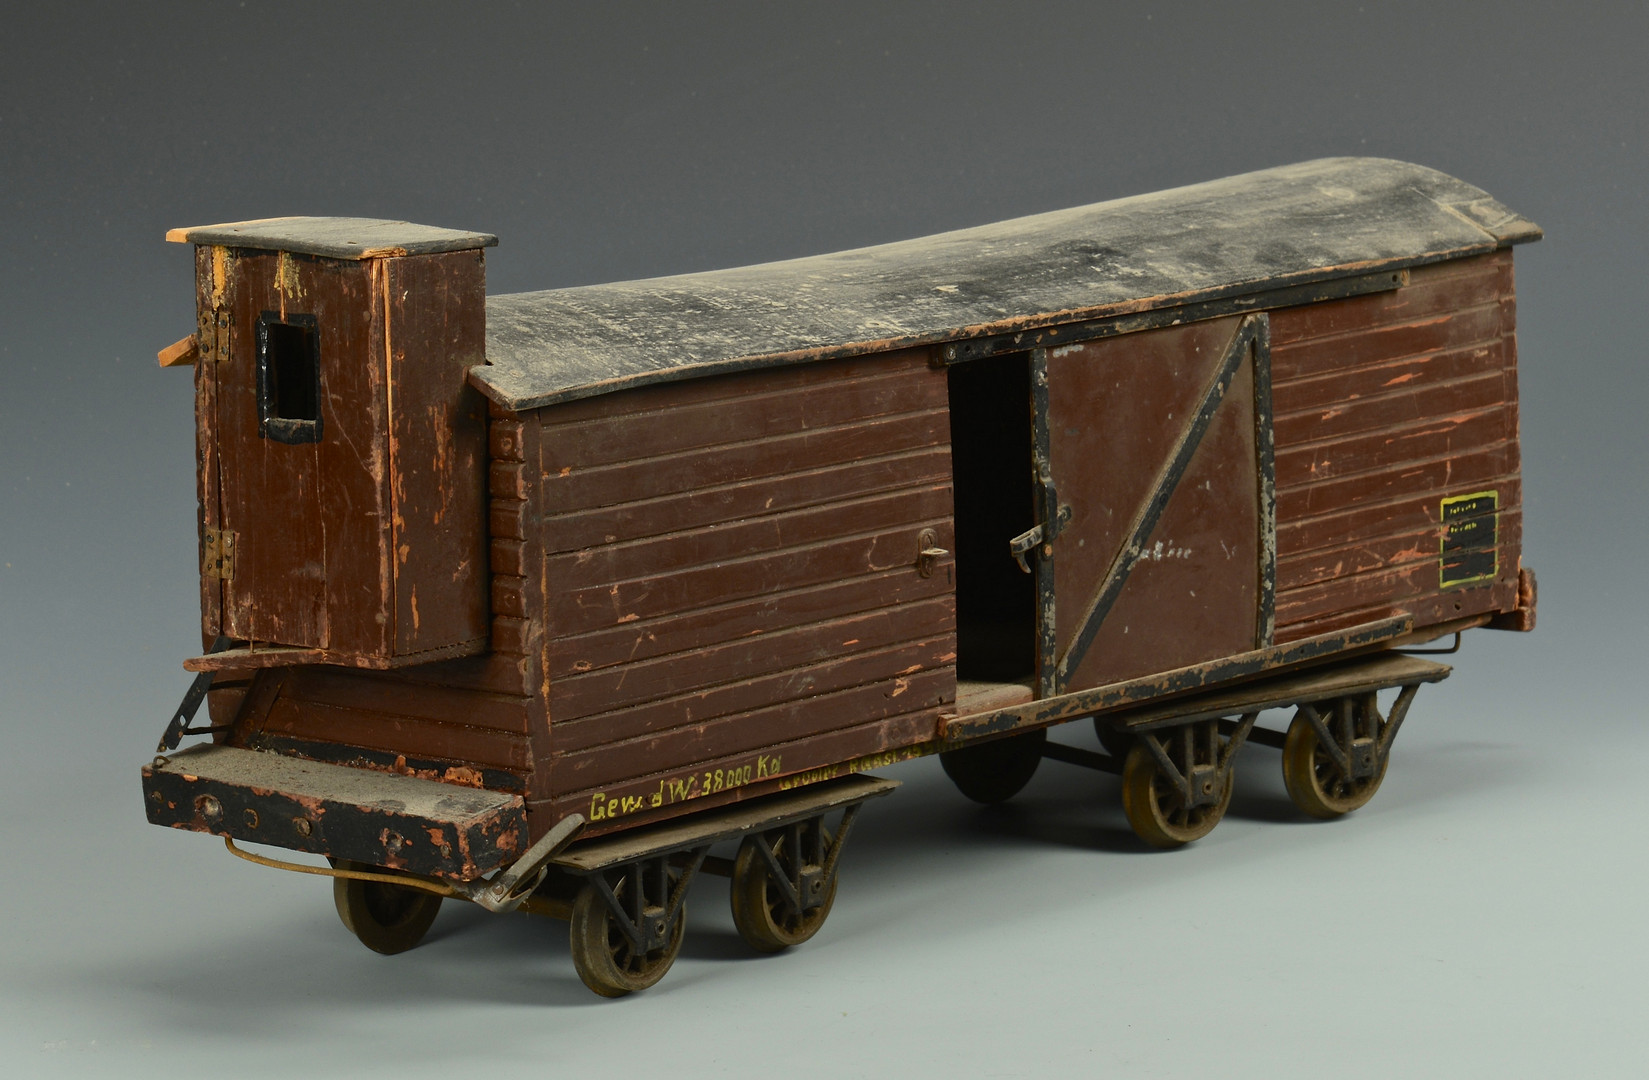 Lot 473: 5 Large Floor Scale Wooden Train Cars, Mitropa